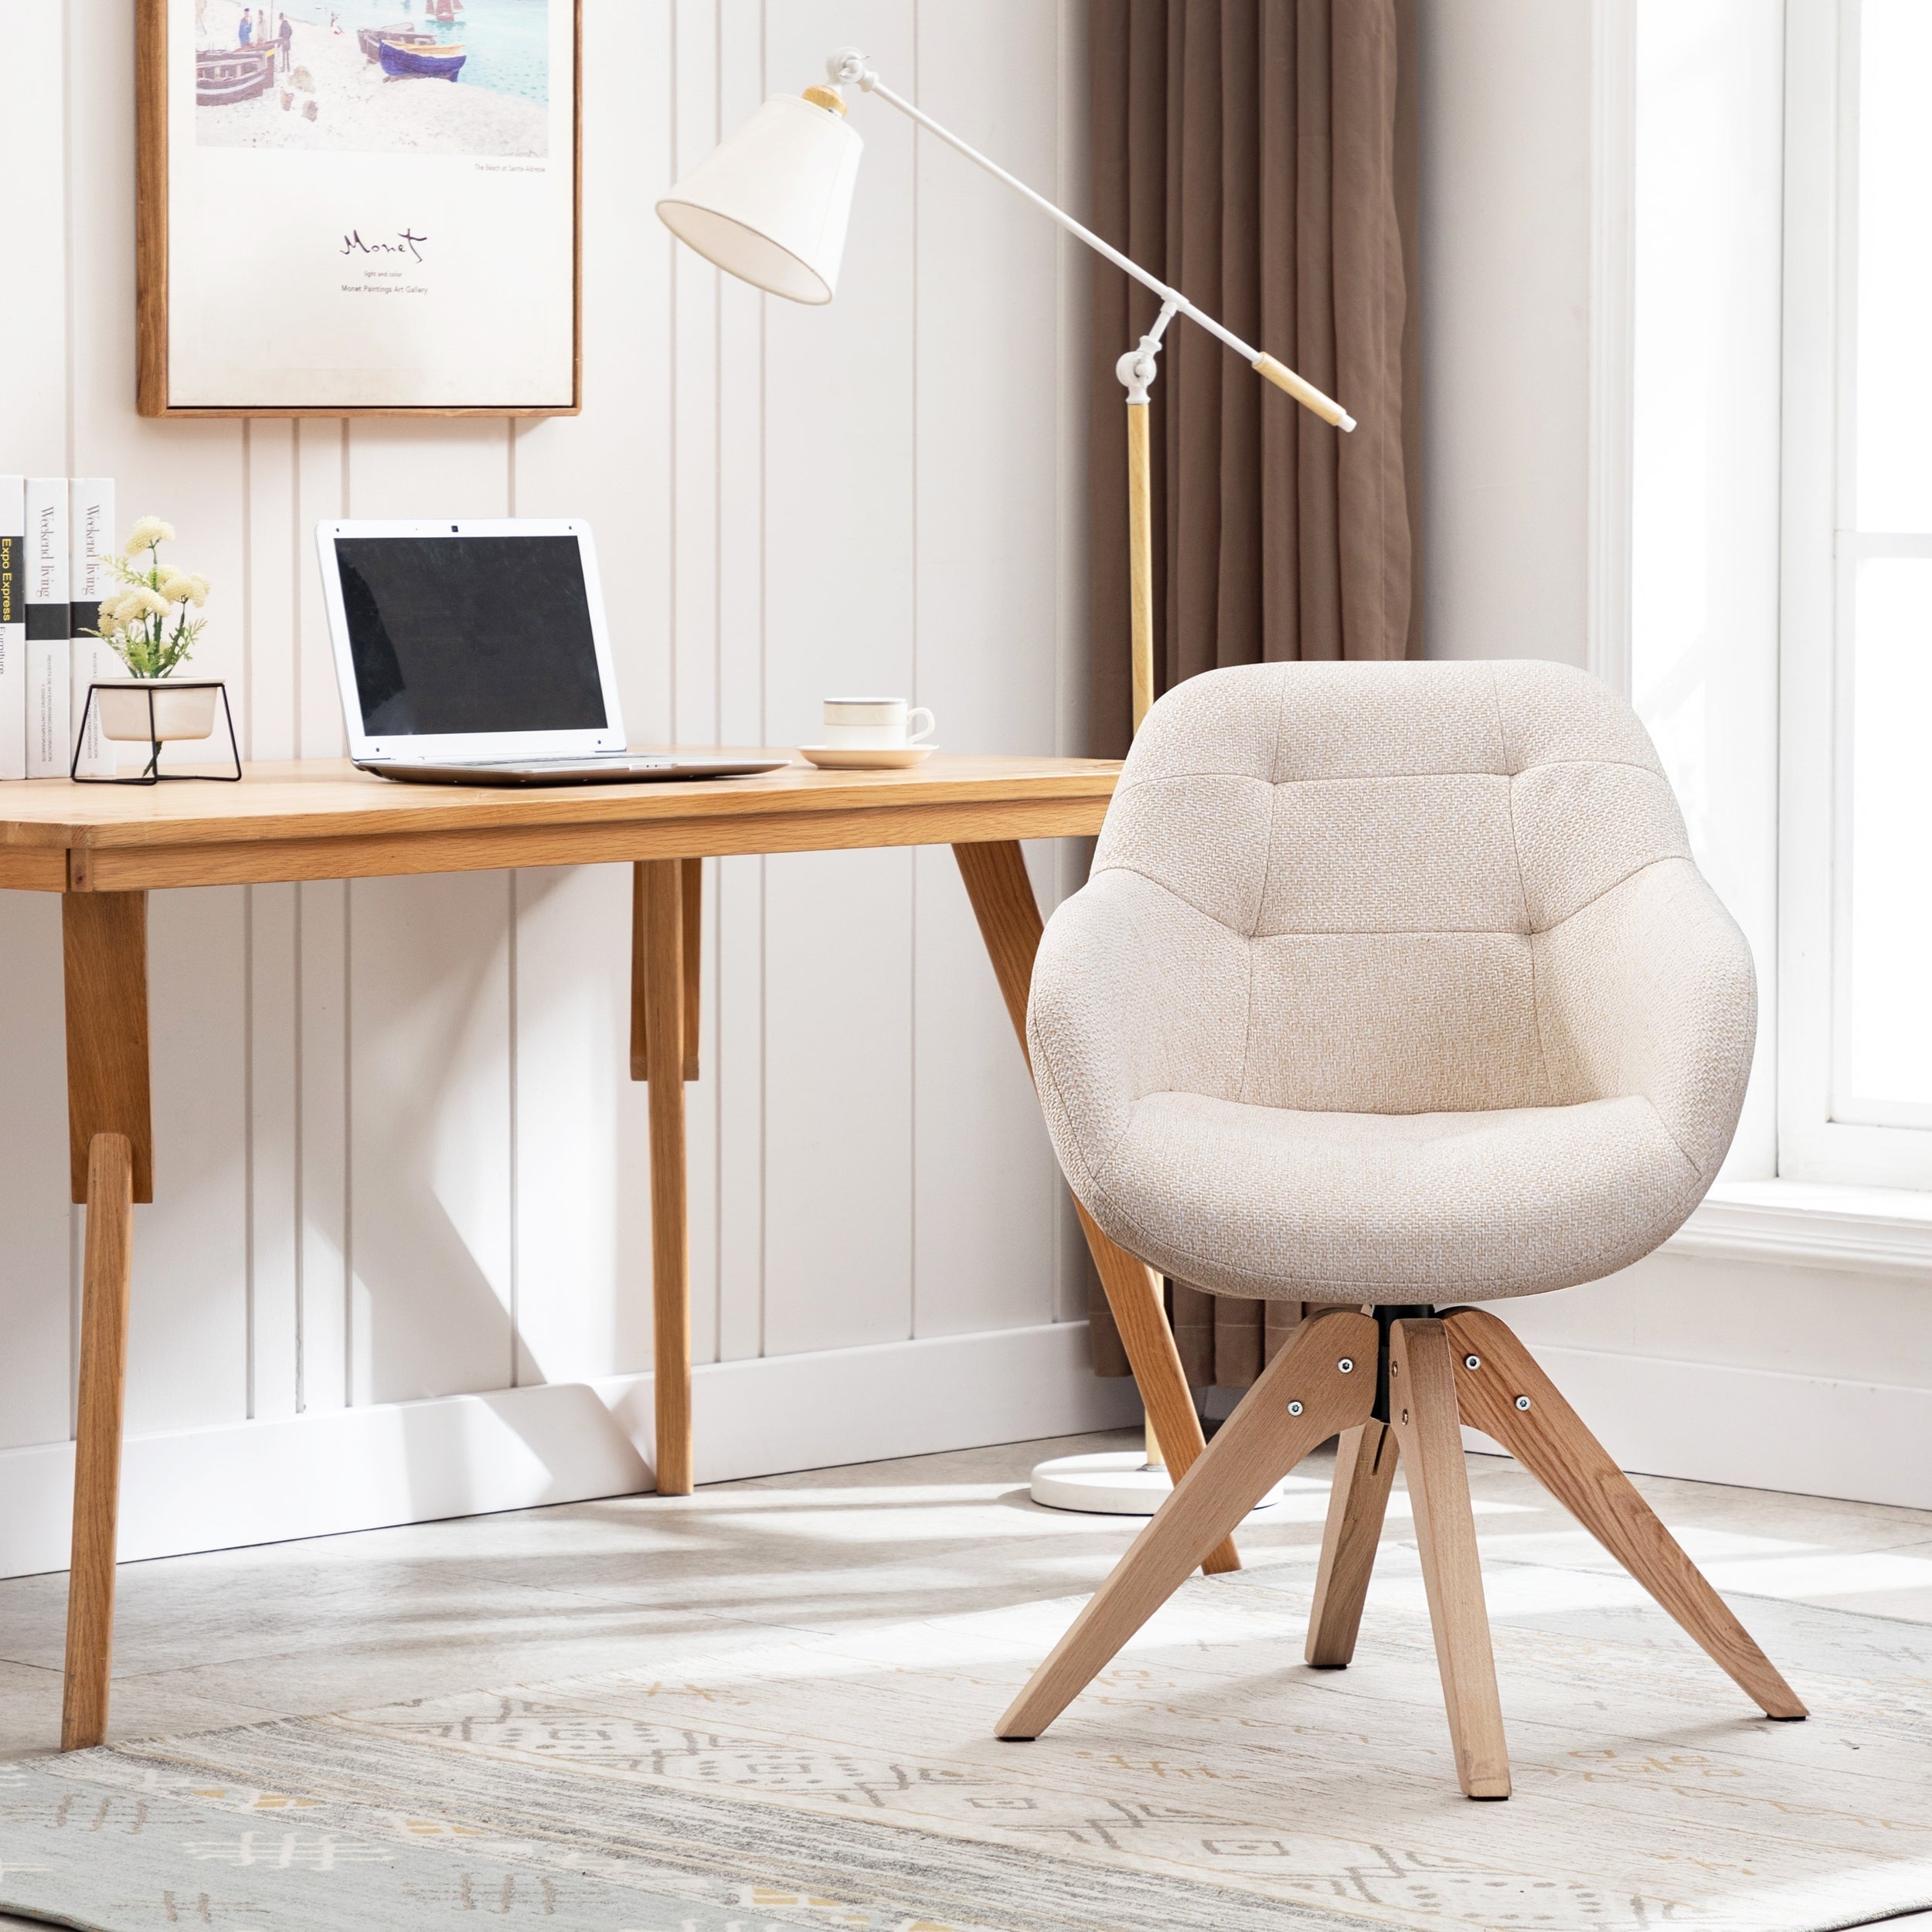 How to Transform an Accent Chair into a Desk Chair?